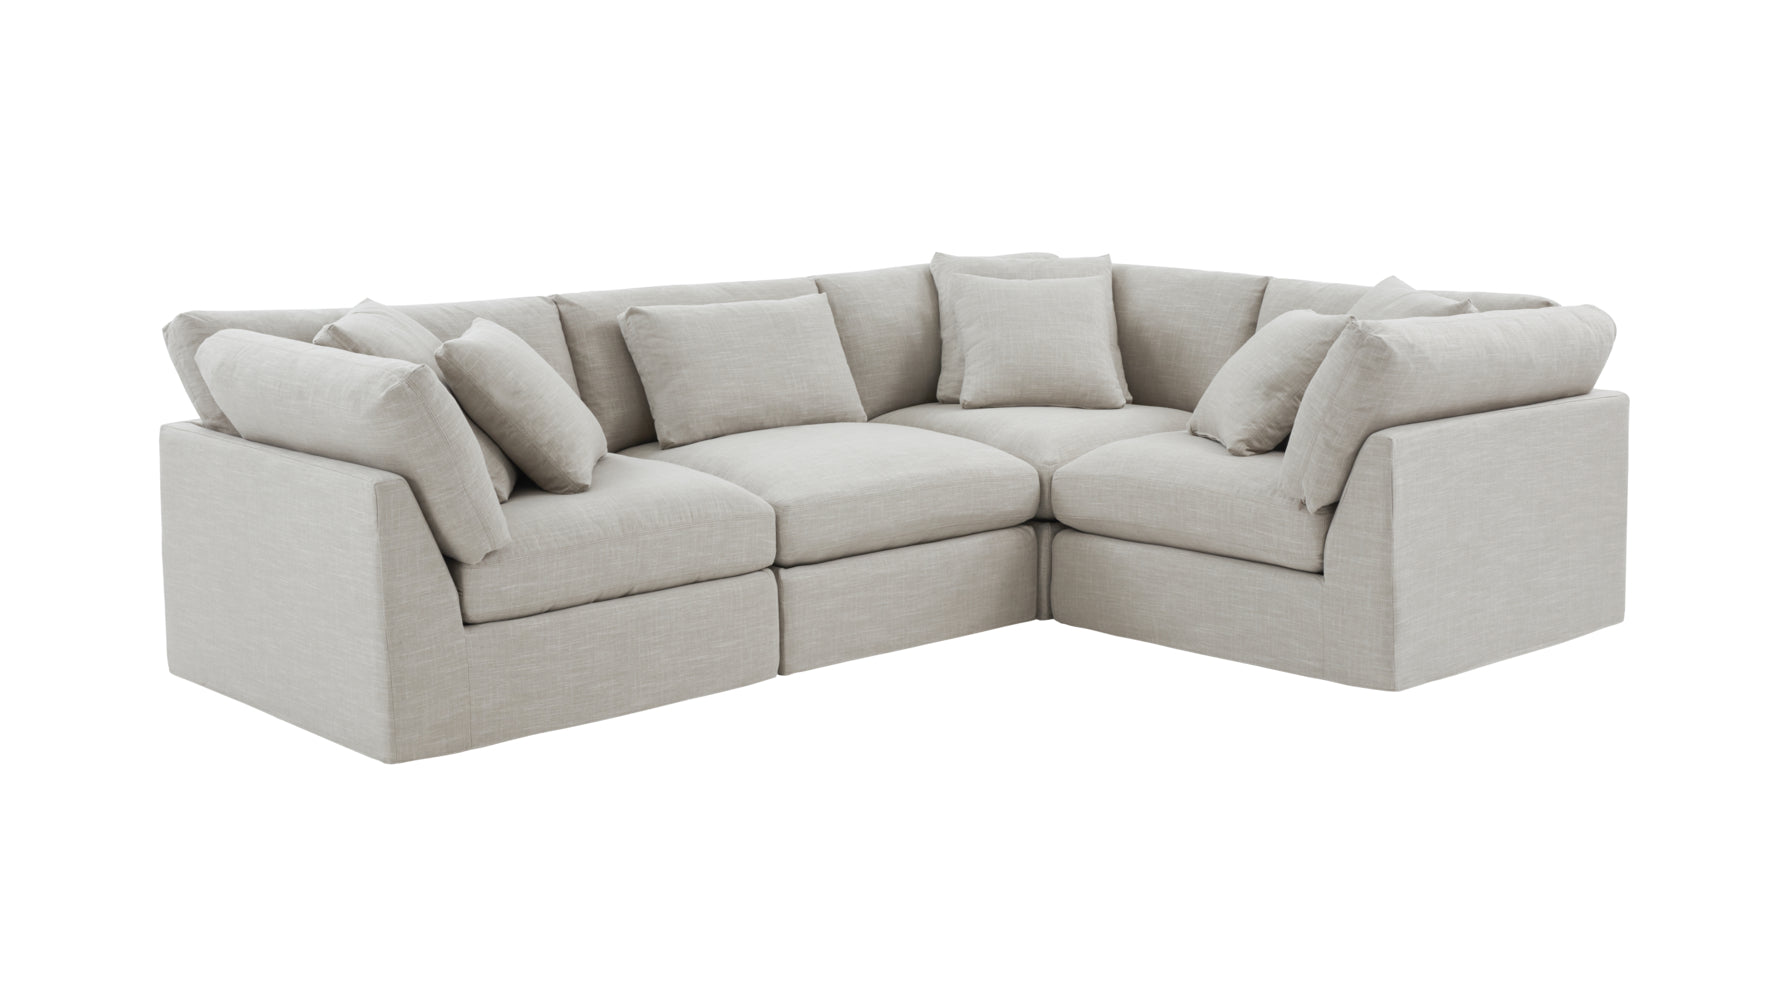 Get Together™ 4-Piece Modular Sectional Closed, Large, Light Pebble - Image 2